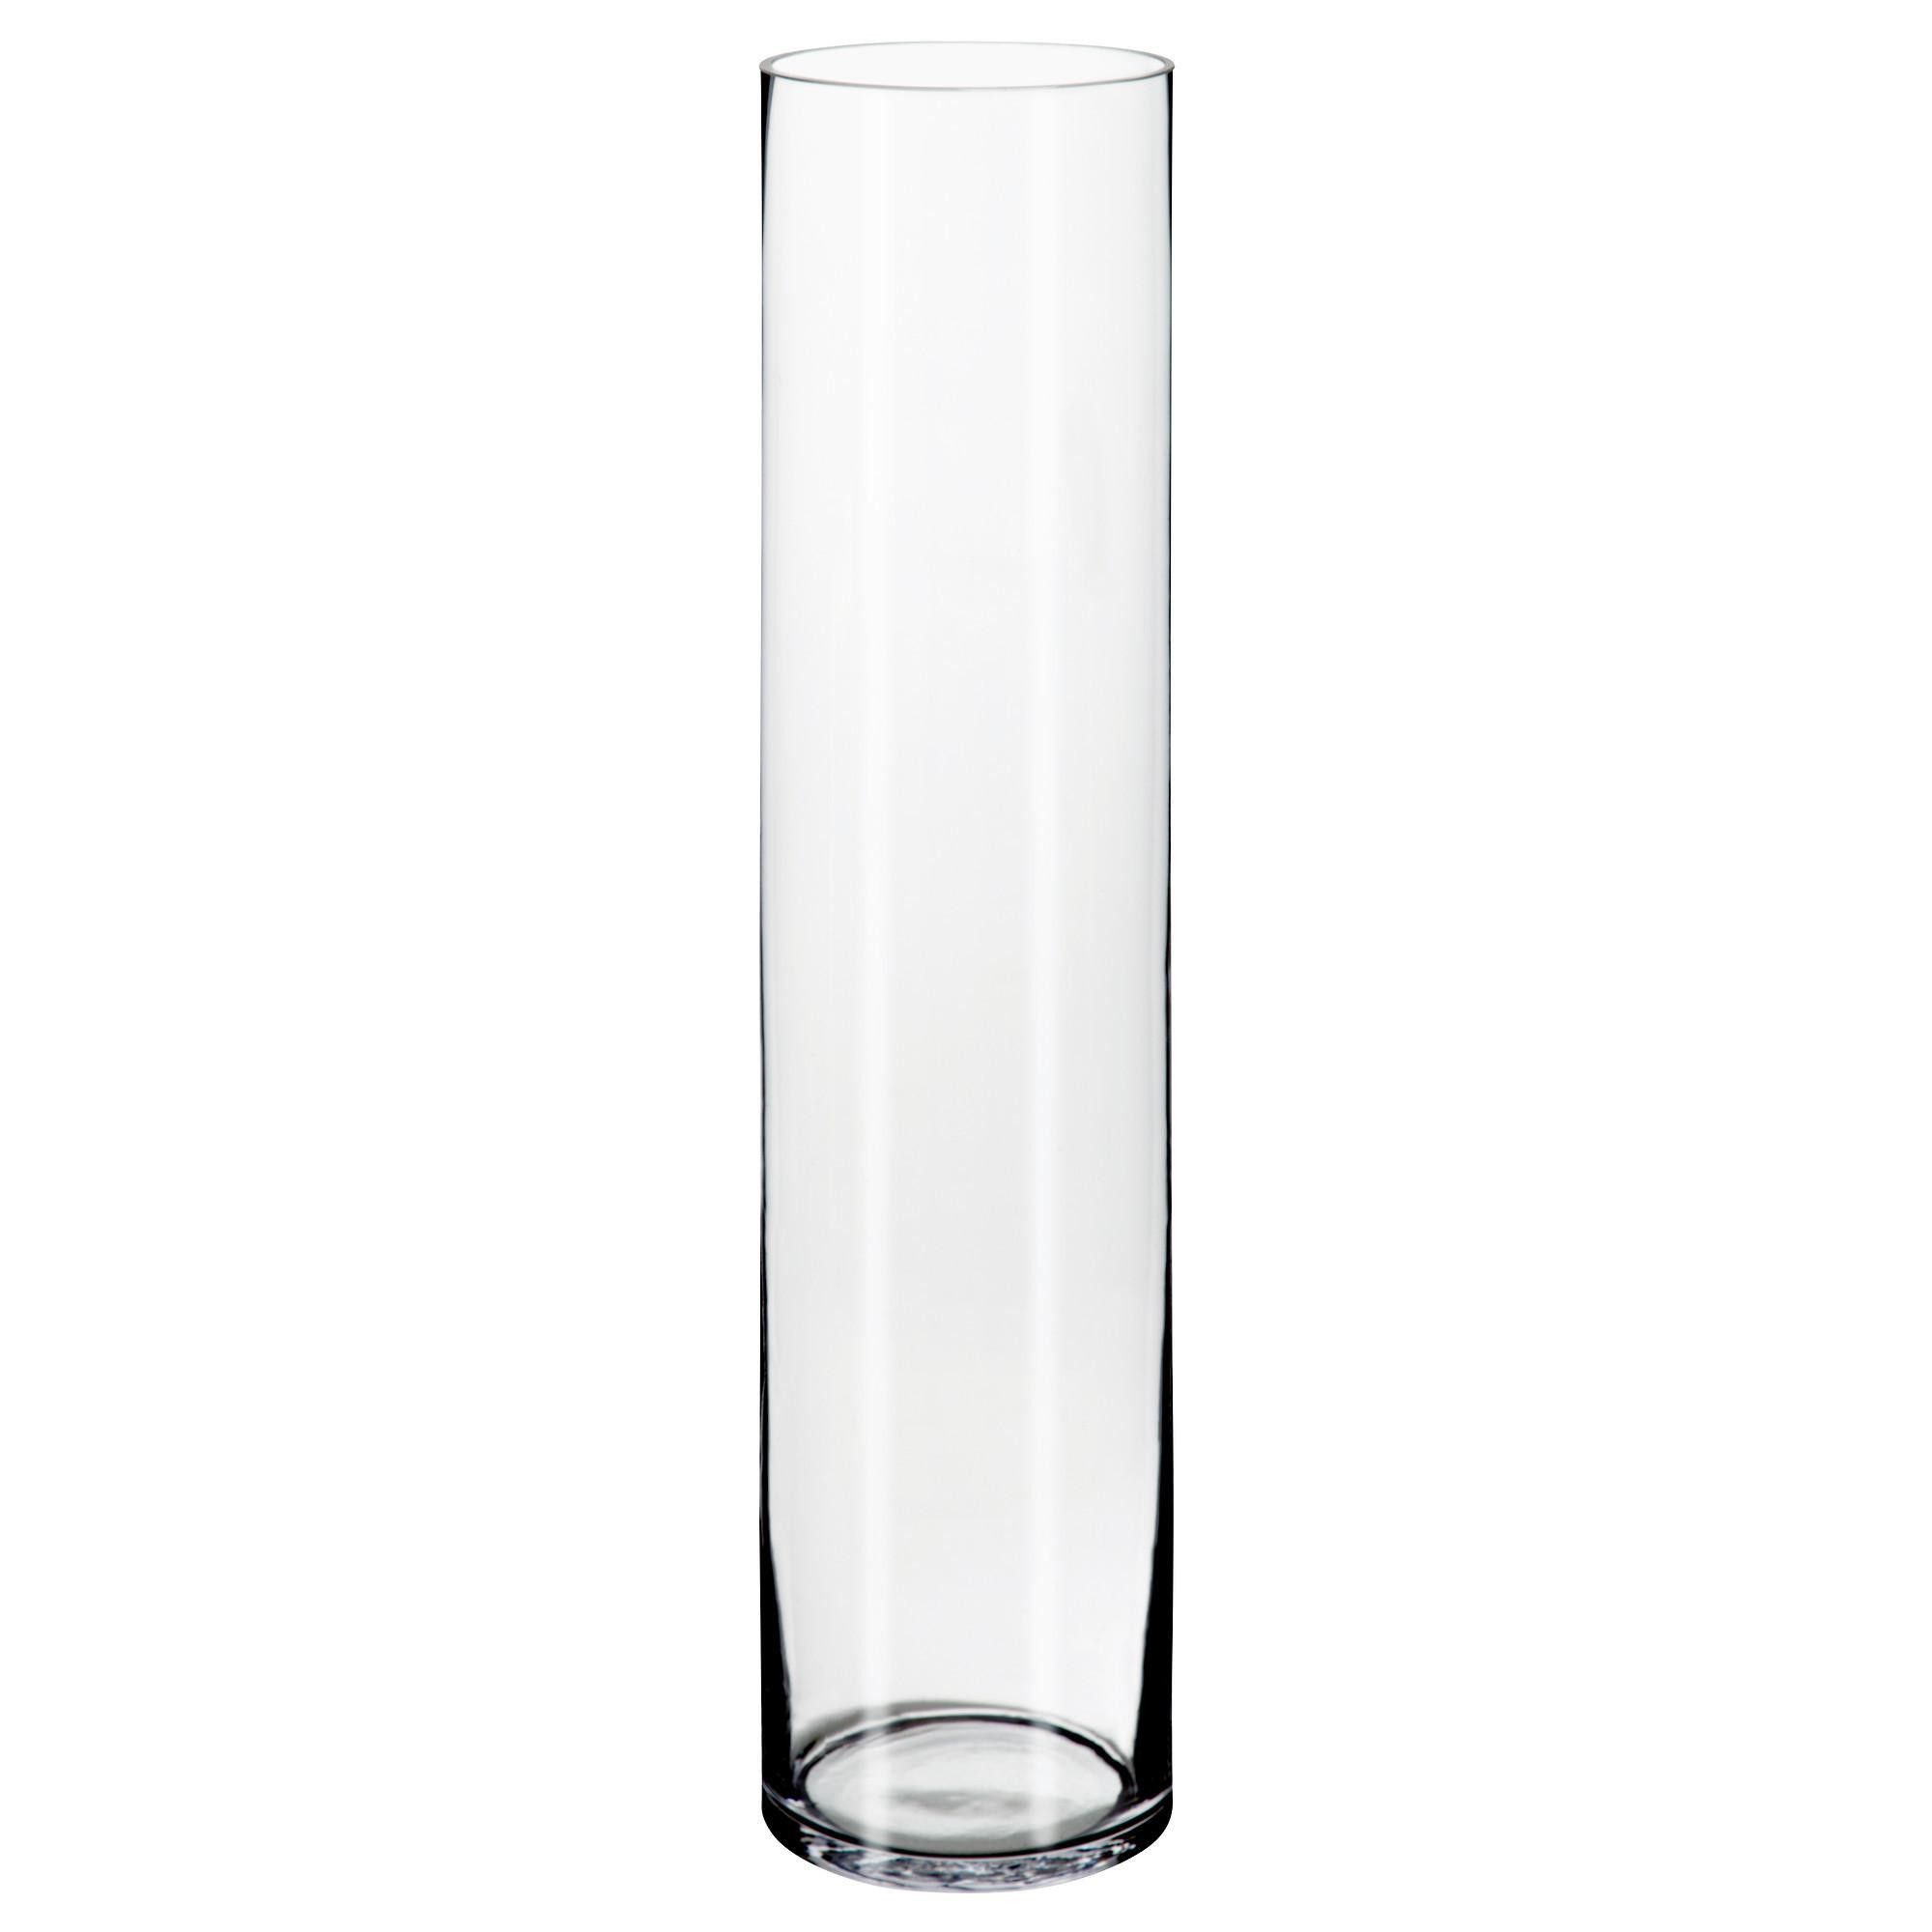 glass vase suppliers of 50 smoked glass vase the weekly world regarding coloring colored glass vases elegant living room vase glass fresh